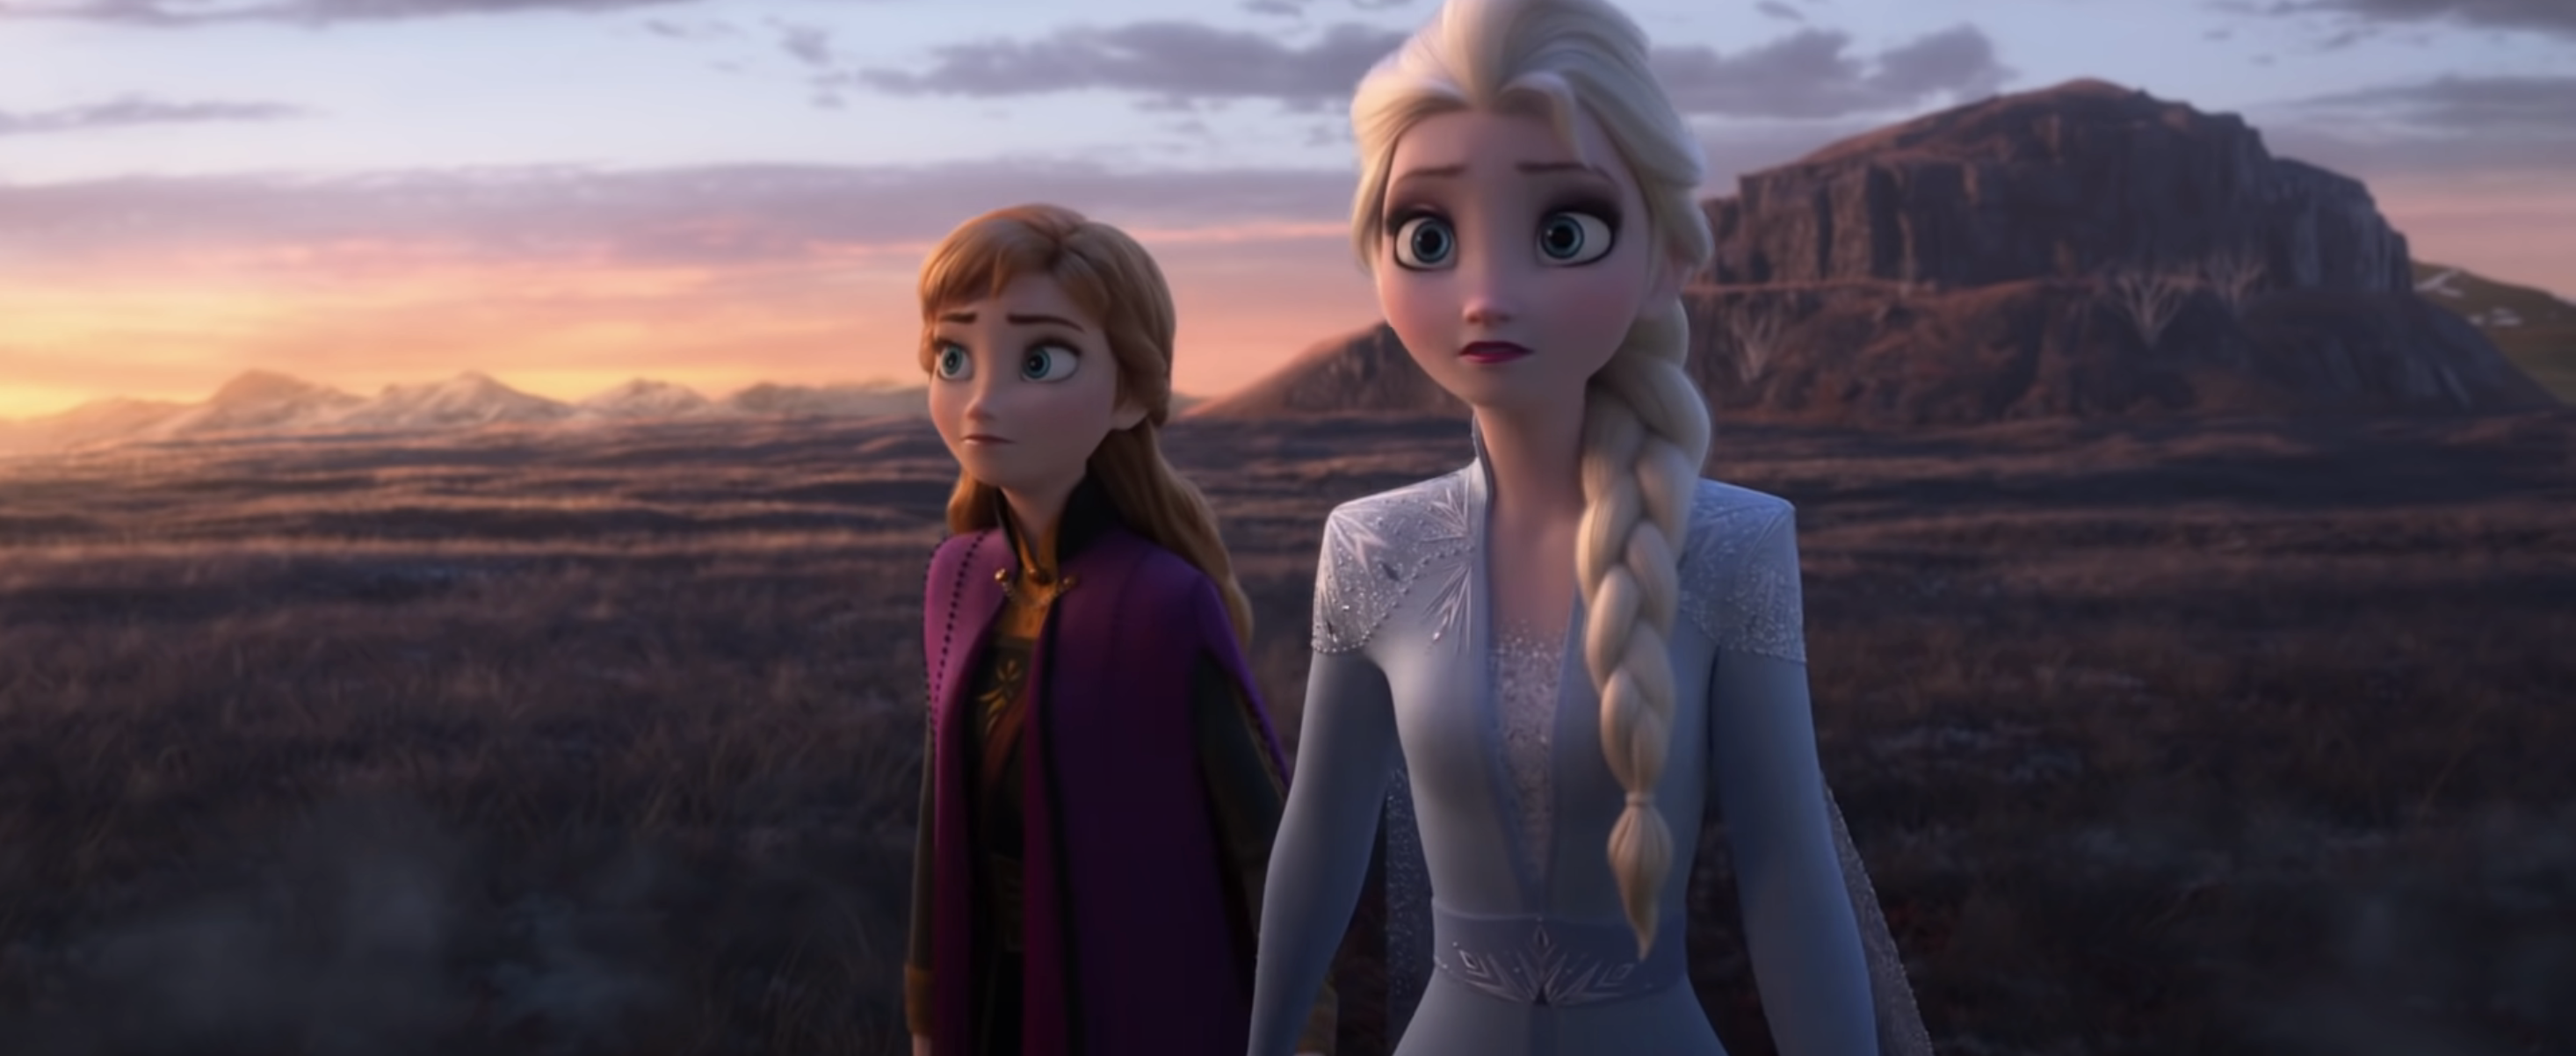 Anna and Elsa from Frozen stand side by side with a worried look, gazing into the distance